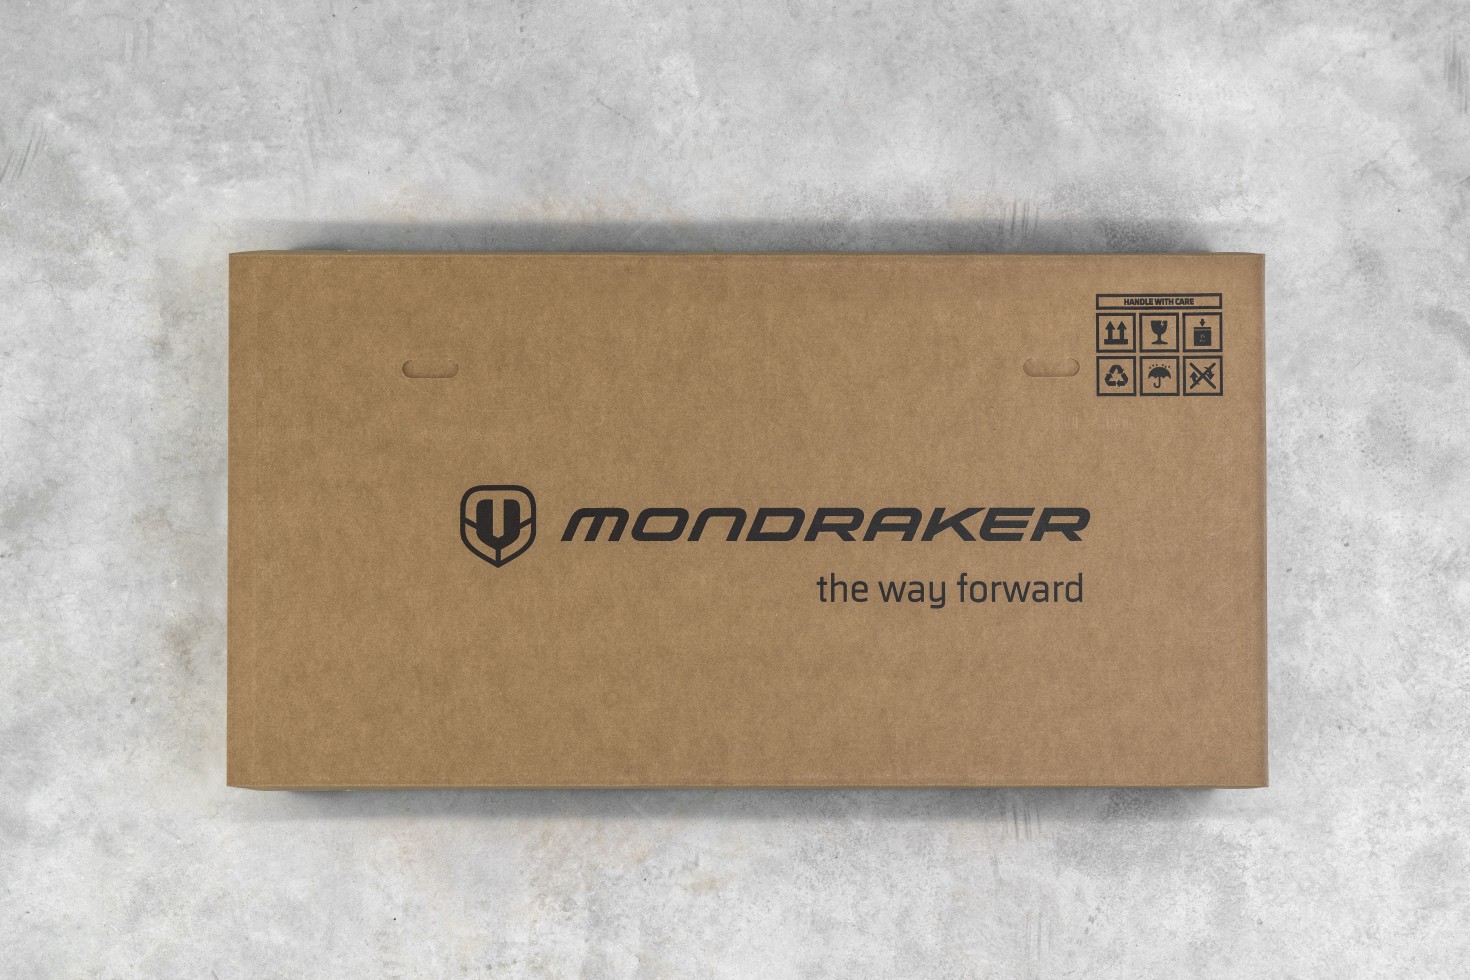 Mondraker introduces plastic-free, 100% recyclable packaging for bikes